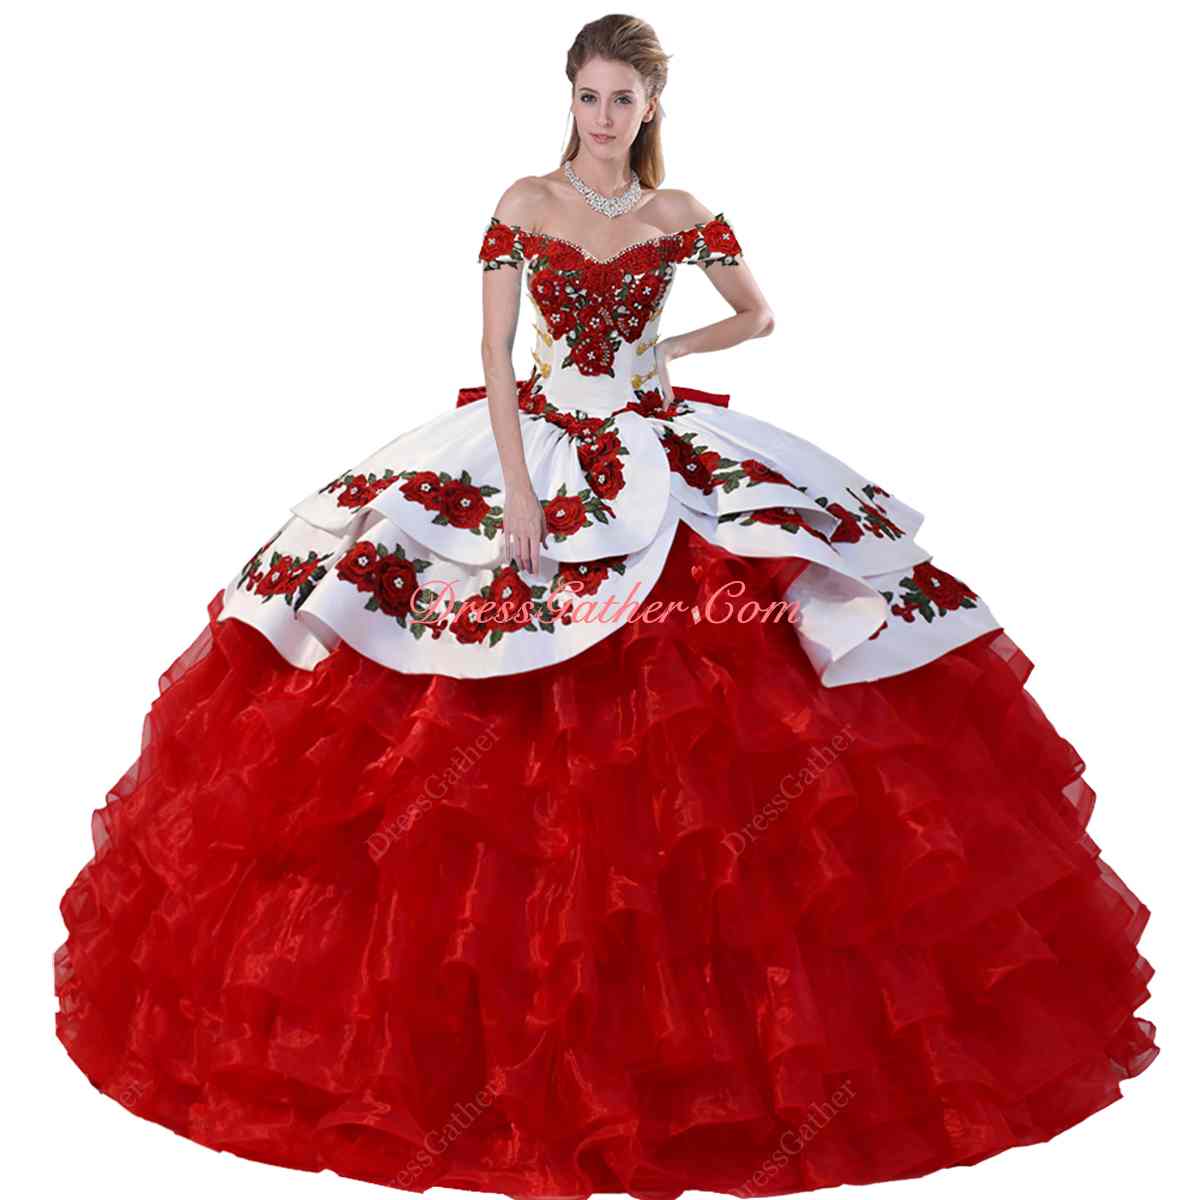 Off Shoulder 3D Flowers Mexican Charra Vestido De Anos XV Quinceanera Ball Gown White and Red - Click Image to Close